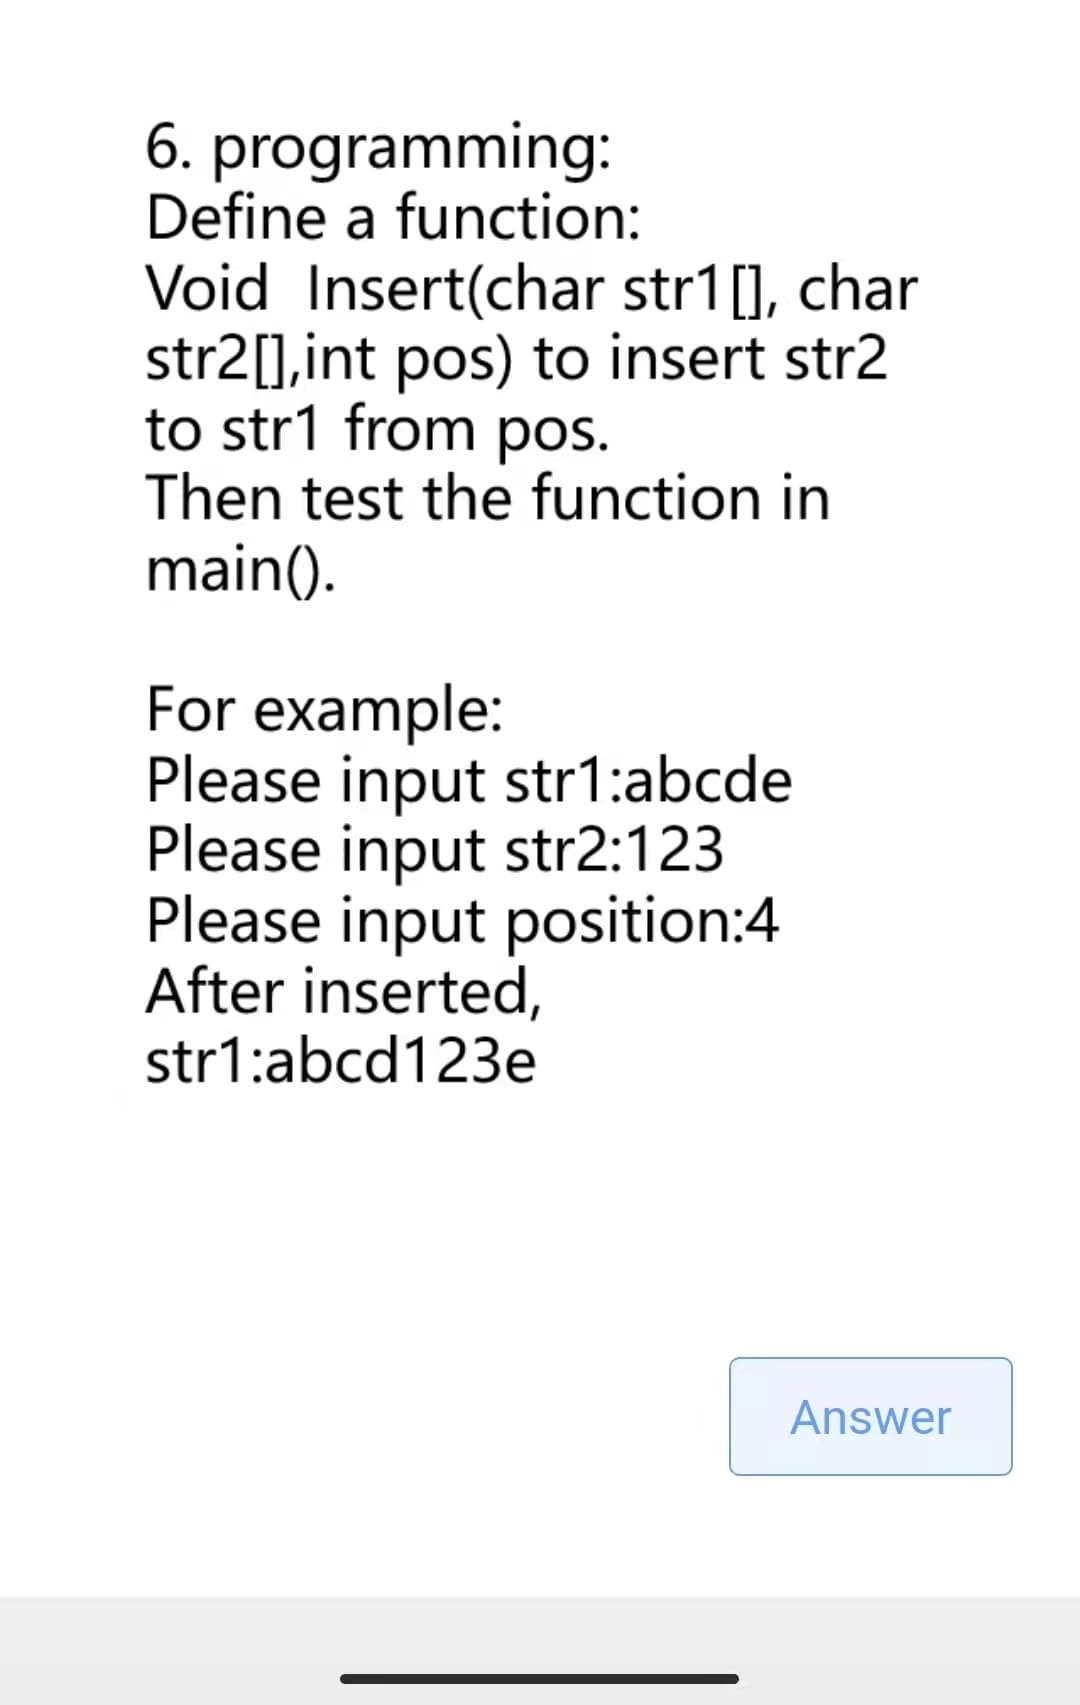 6. programming:
Define a function:
Void Insert(char str1[], char
str2[], int pos) to insert str2
to str1 from pos.
Then test the function in
main().
For example:
Please input str1:abcde
Please input str2:123
Please input position:4
After inserted,
str1:abcd123e
Answer